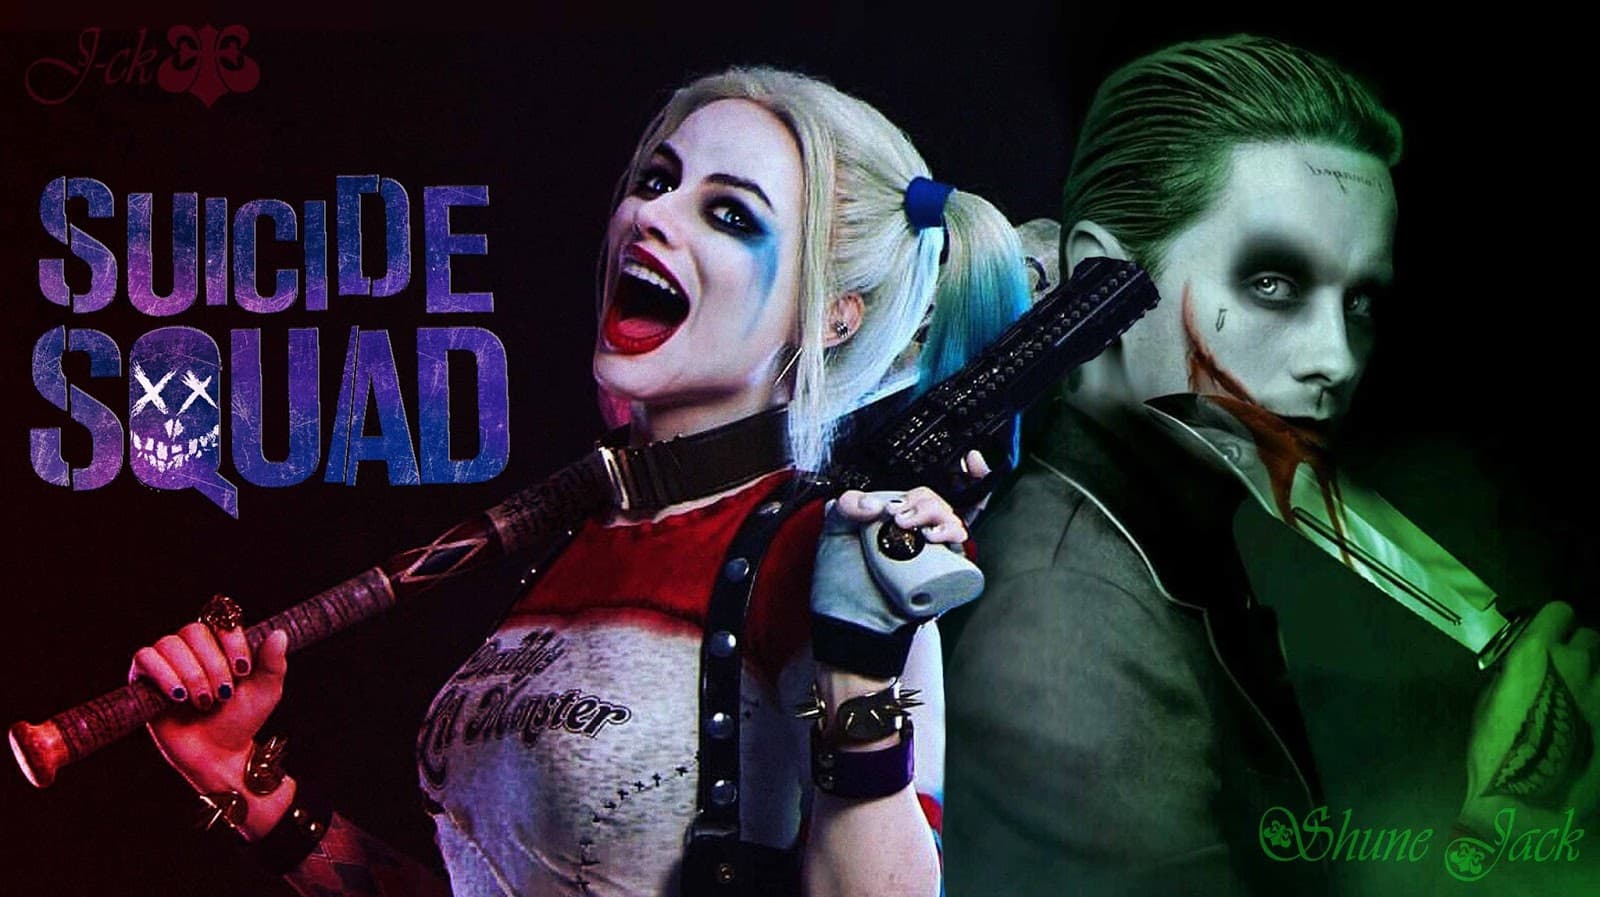 Art Harley Quinn Suicide Squad Wallpaper Free Art Harley Quinn Suicide Squad Background